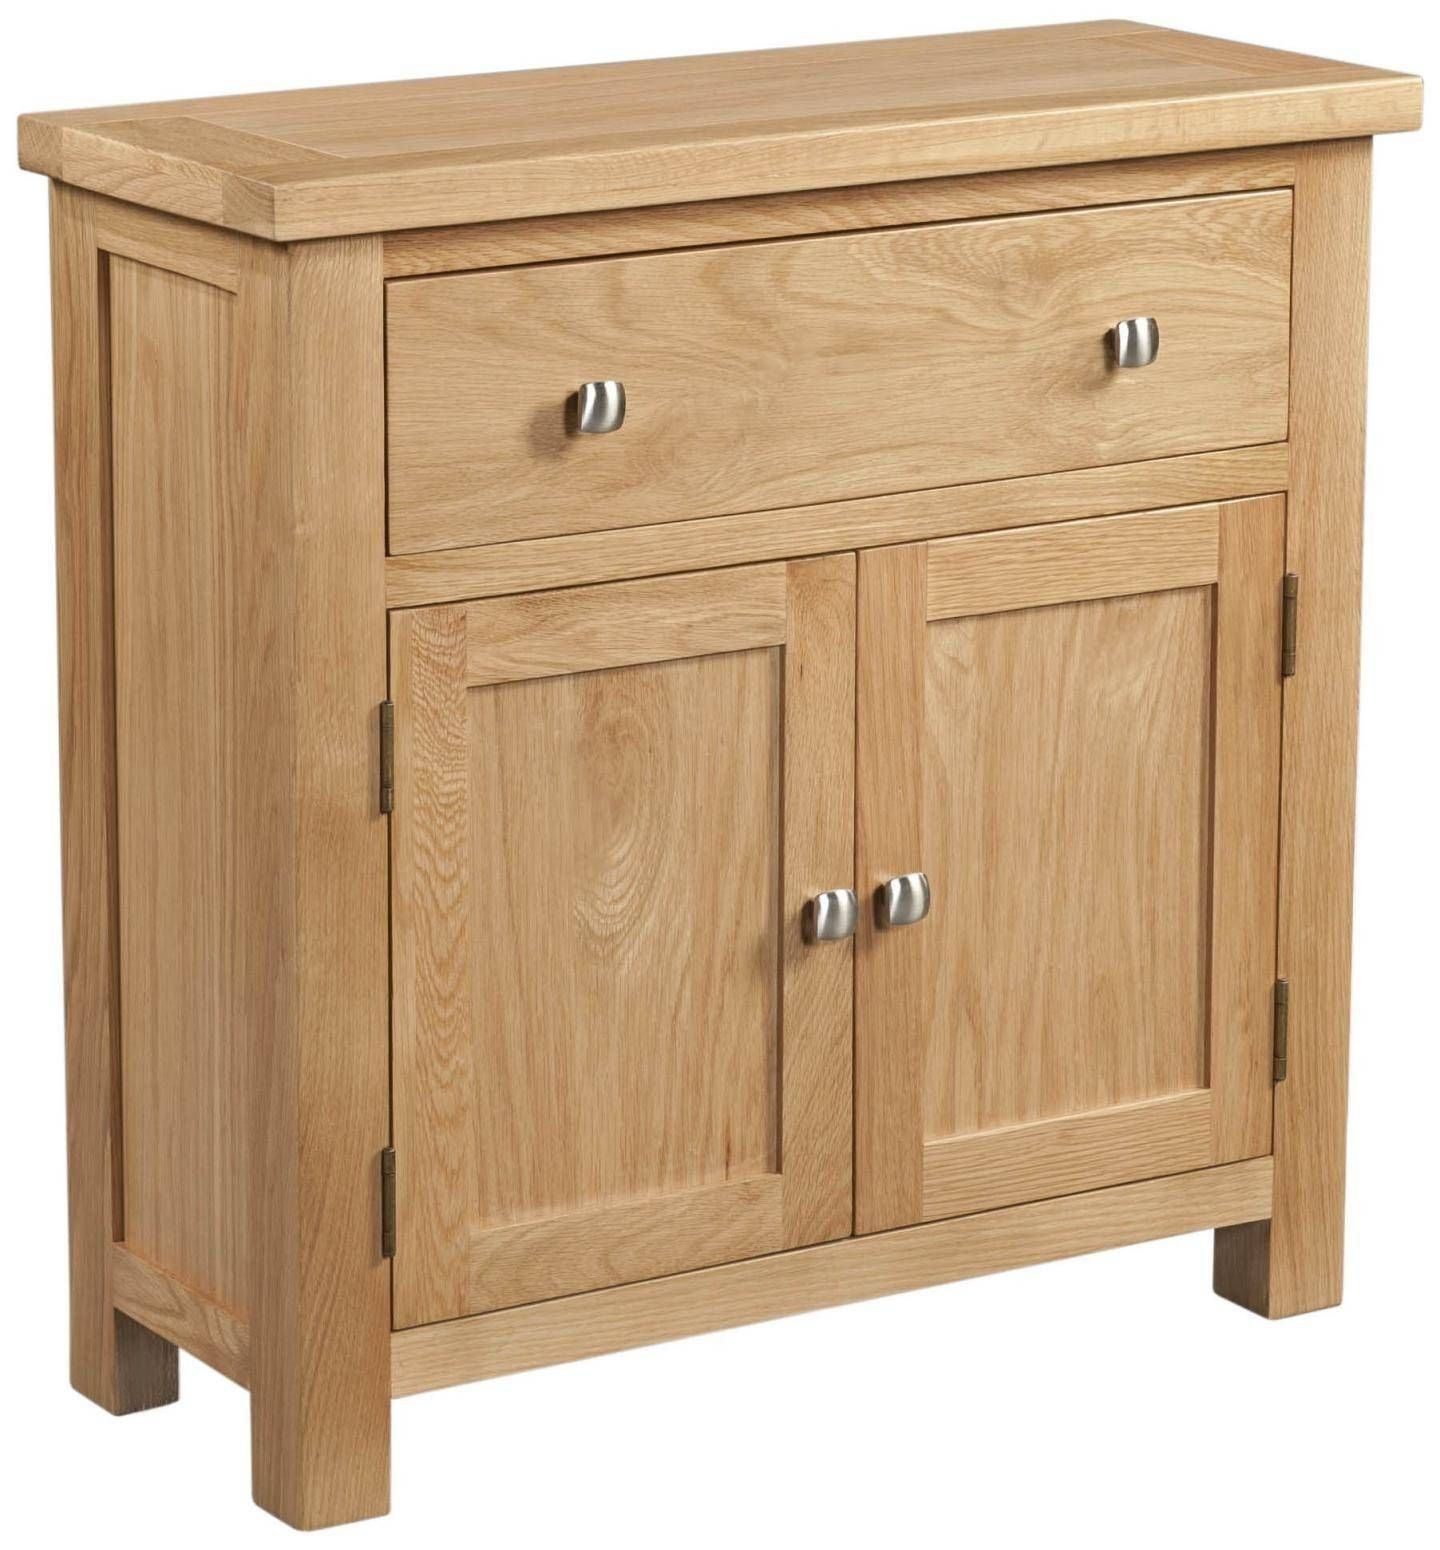 Lovely Pine & Oak Sideboards | Willoby's Furniture Swindon, Wiltshire Pertaining To Most Current Wooden Sideboards For Sale (Photo 4 of 15)